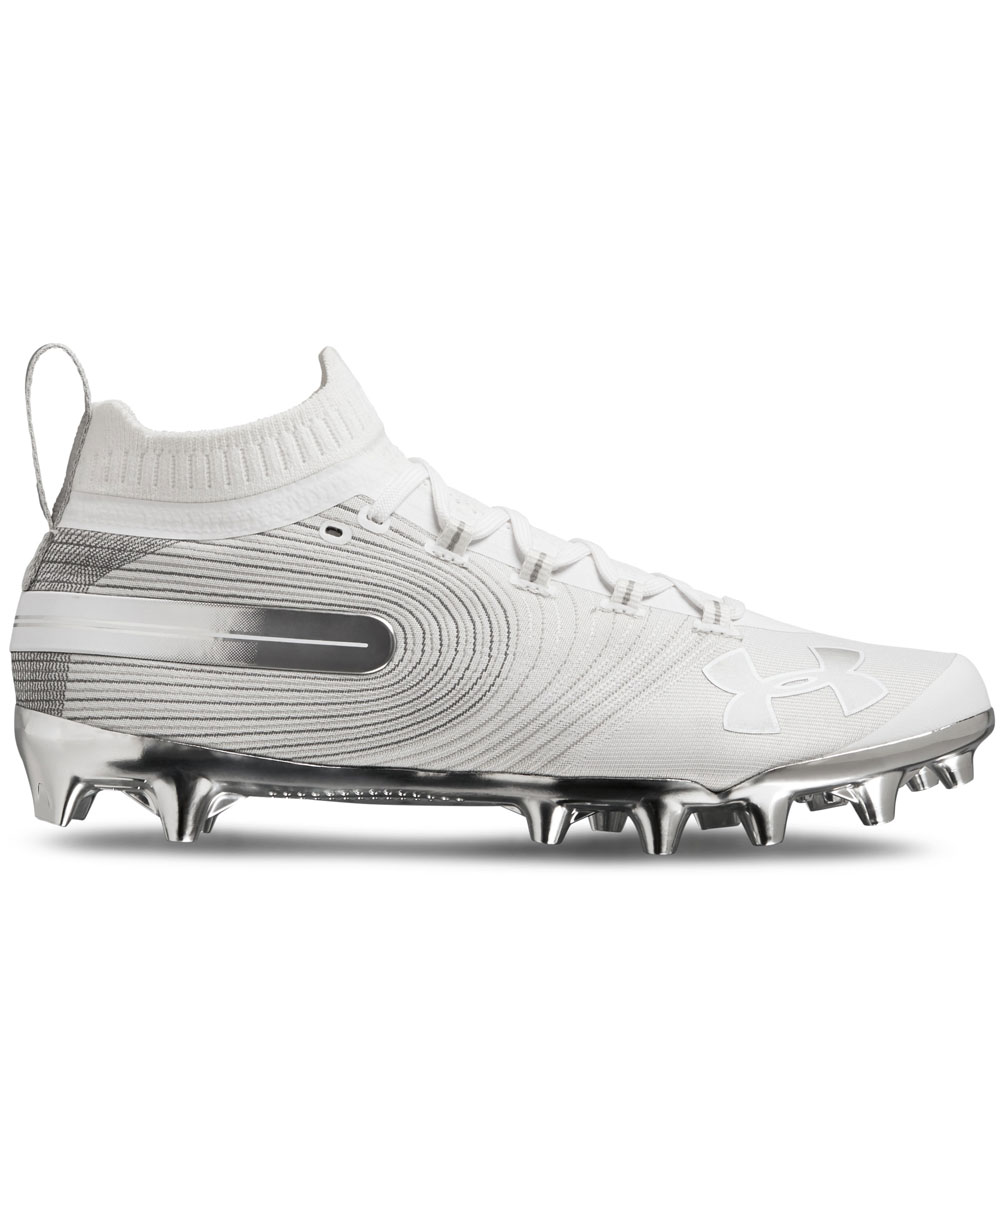 all white under armour cleats